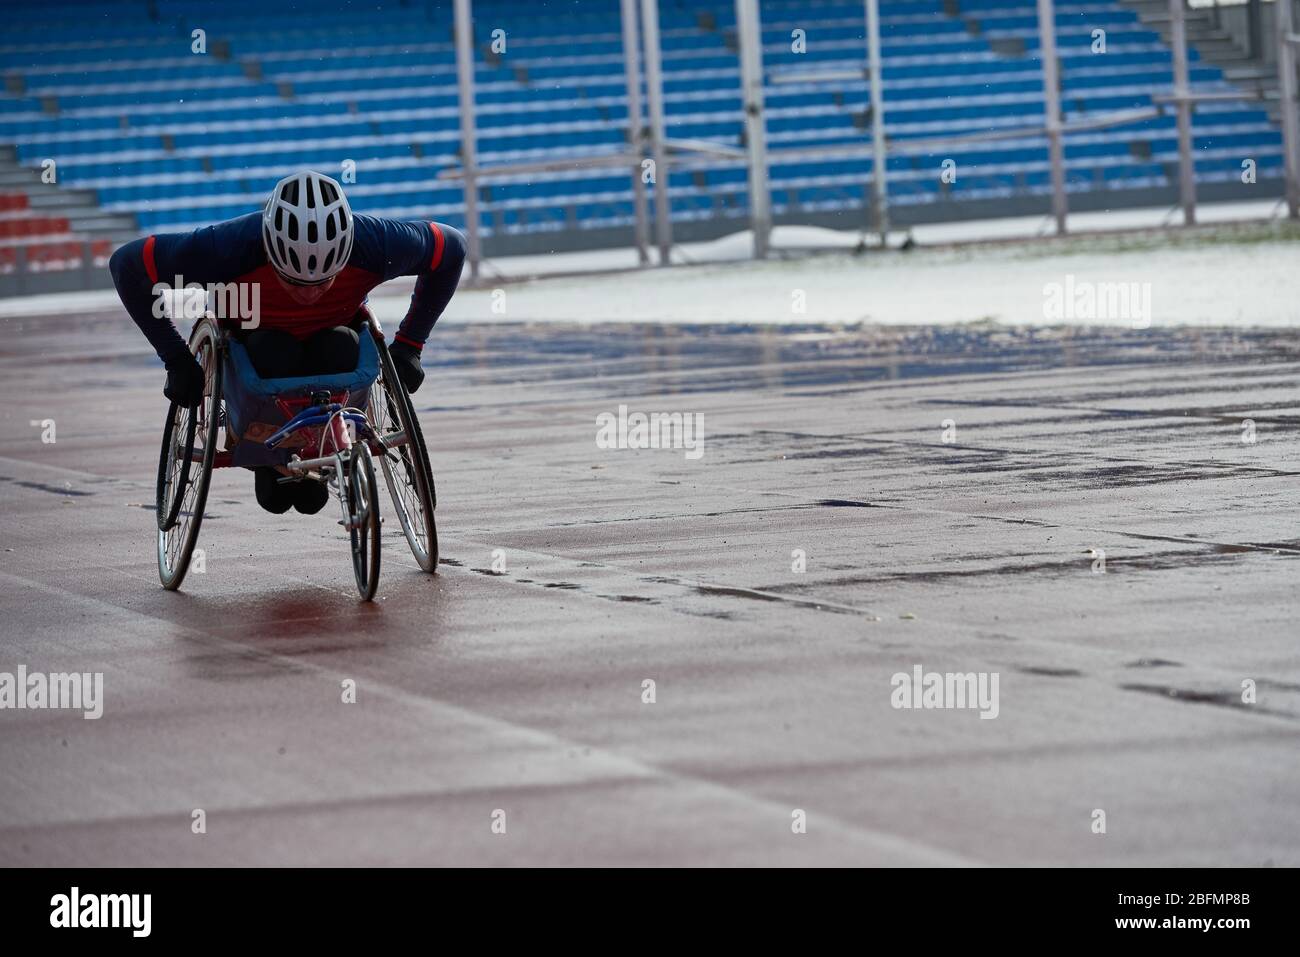 Preparing for wheelchair marathon. Determined paraplegic sportsman racing in handcycle at outdoor track and field stadium in gloomy rainy afternoon Stock Photo